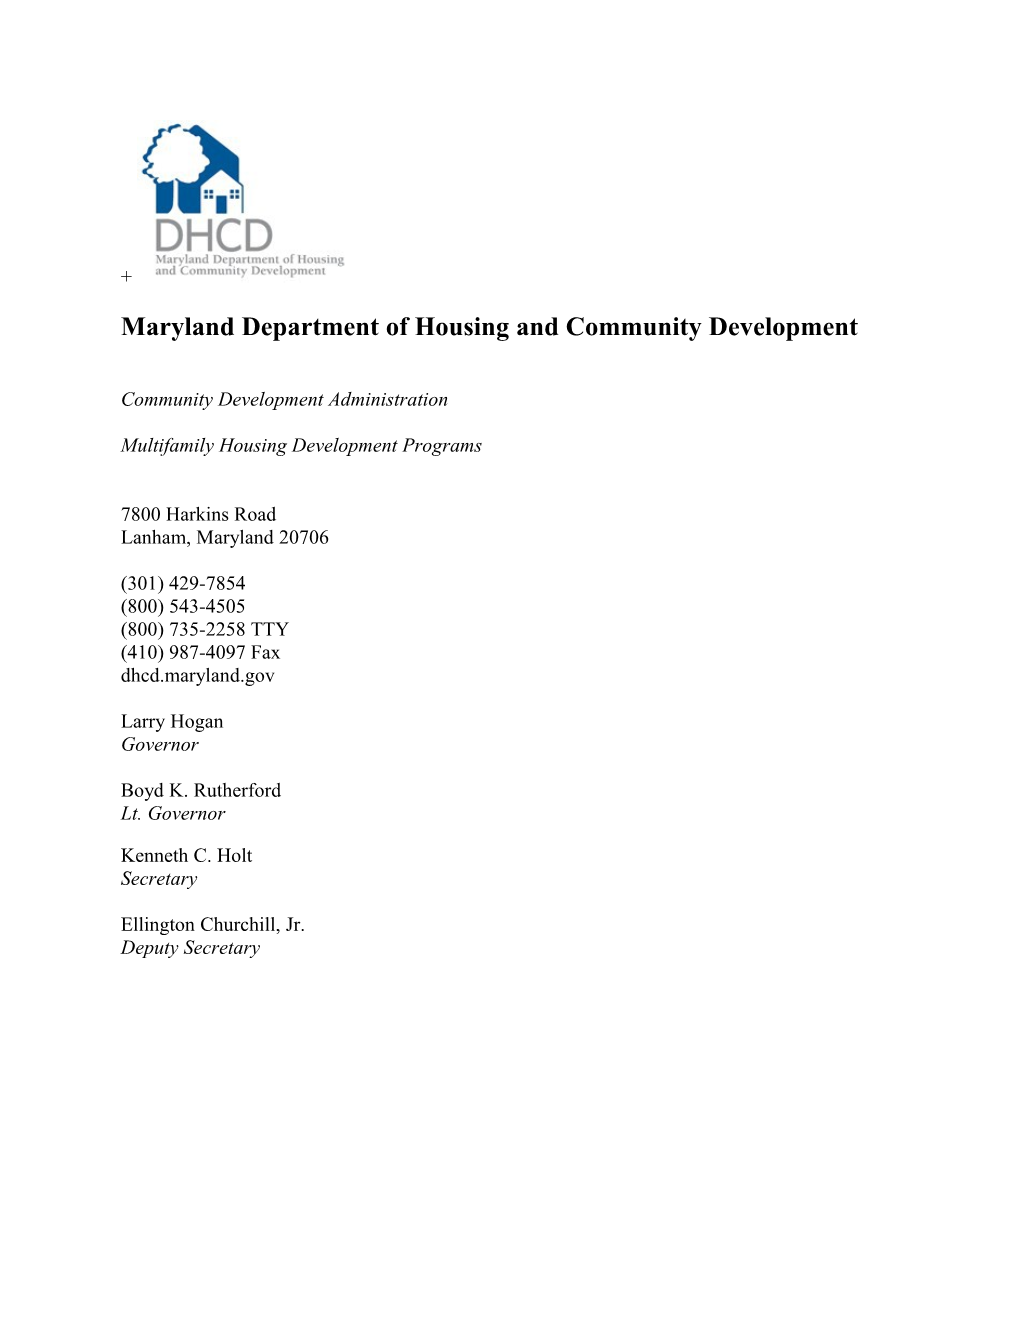 Maryland Department of Housing and Community Development s1